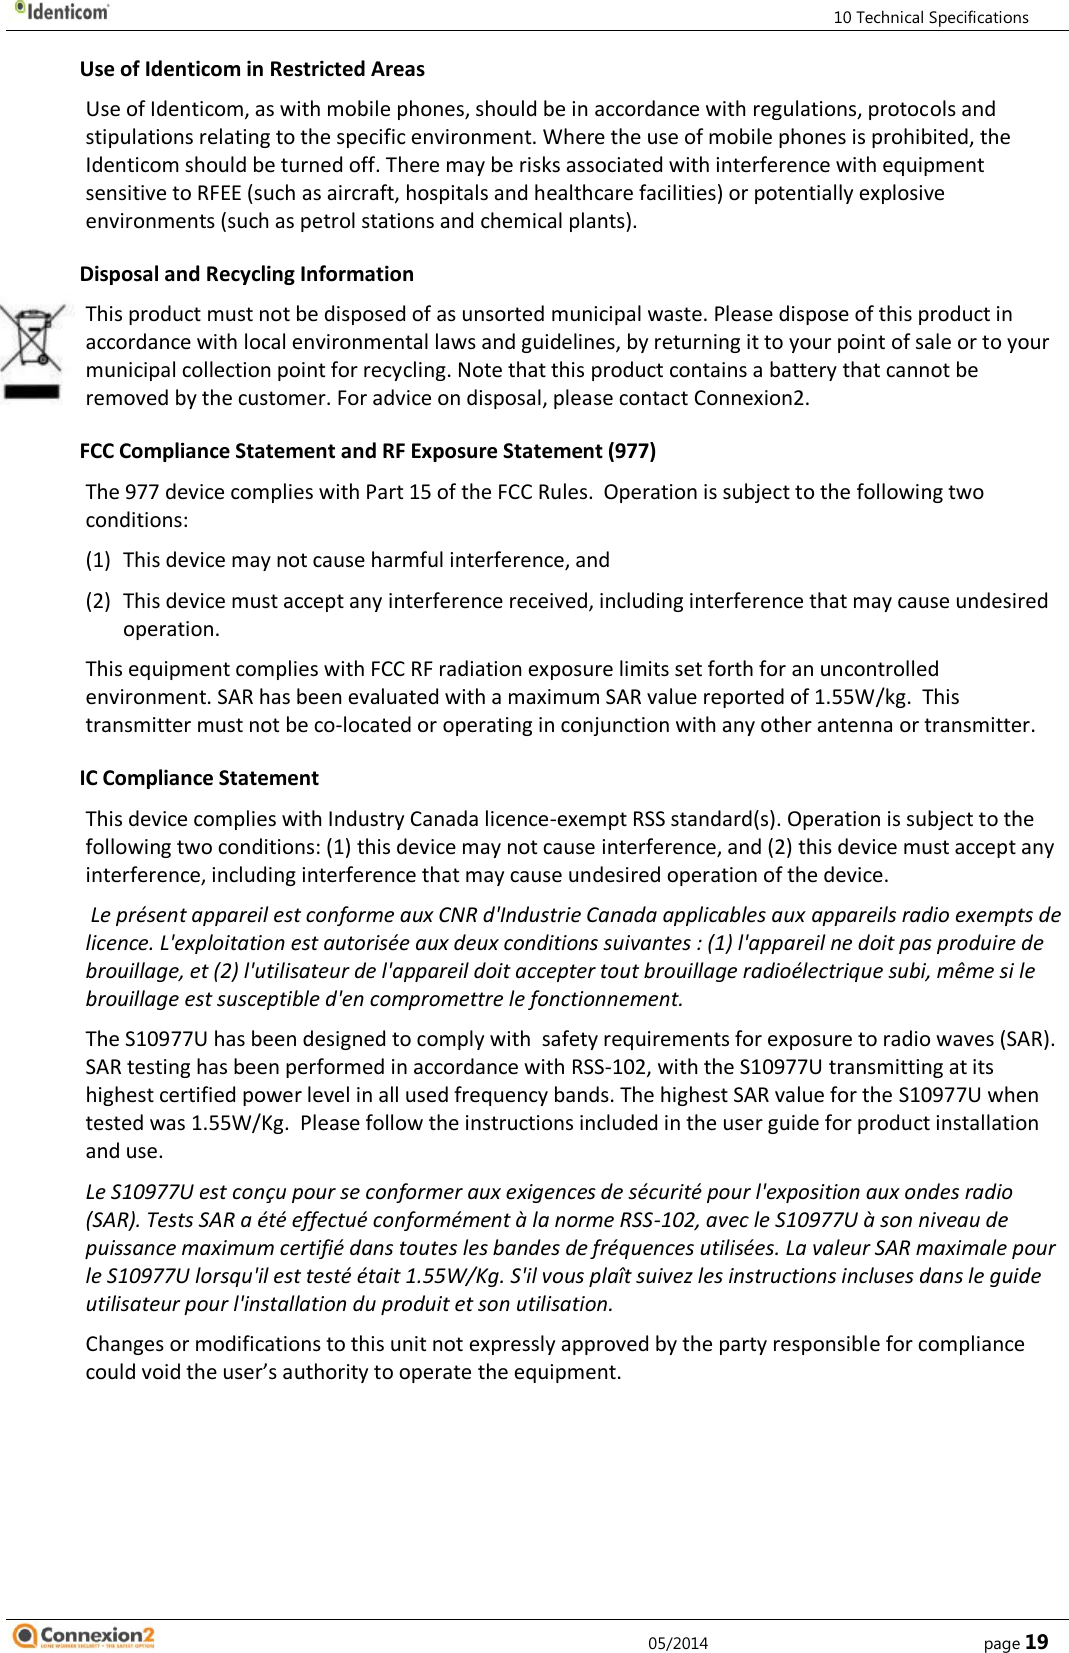         10 Technical Specifications     05/2014        page 19 Use of Identicom in Restricted Areas Use of Identicom, as with mobile phones, should be in accordance with regulations, protocols and stipulations relating to the specific environment. Where the use of mobile phones is prohibited, the Identicom should be turned off. There may be risks associated with interference with equipment sensitive to RFEE (such as aircraft, hospitals and healthcare facilities) or potentially explosive environments (such as petrol stations and chemical plants). Disposal and Recycling Information This product must not be disposed of as unsorted municipal waste. Please dispose of this product in accordance with local environmental laws and guidelines, by returning it to your point of sale or to your municipal collection point for recycling. Note that this product contains a battery that cannot be removed by the customer. For advice on disposal, please contact Connexion2. FCC Compliance Statement and RF Exposure Statement (977) The 977 device complies with Part 15 of the FCC Rules.  Operation is subject to the following two conditions: (1) This device may not cause harmful interference, and (2) This device must accept any interference received, including interference that may cause undesired operation. This equipment complies with FCC RF radiation exposure limits set forth for an uncontrolled environment. SAR has been evaluated with a maximum SAR value reported of 1.55W/kg.  This transmitter must not be co-located or operating in conjunction with any other antenna or transmitter. IC Compliance Statement This device complies with Industry Canada licence-exempt RSS standard(s). Operation is subject to the following two conditions: (1) this device may not cause interference, and (2) this device must accept any interference, including interference that may cause undesired operation of the device.  Le présent appareil est conforme aux CNR d&apos;Industrie Canada applicables aux appareils radio exempts de licence. L&apos;exploitation est autorisée aux deux conditions suivantes : (1) l&apos;appareil ne doit pas produire de brouillage, et (2) l&apos;utilisateur de l&apos;appareil doit accepter tout brouillage radioélectrique subi, même si le brouillage est susceptible d&apos;en compromettre le fonctionnement. The S10977U has been designed to comply with  safety requirements for exposure to radio waves (SAR).  SAR testing has been performed in accordance with RSS-102, with the S10977U transmitting at its highest certified power level in all used frequency bands. The highest SAR value for the S10977U when tested was 1.55W/Kg.  Please follow the instructions included in the user guide for product installation and use. Le S10977U est conçu pour se conformer aux exigences de sécurité pour l&apos;exposition aux ondes radio (SAR). Tests SAR a été effectué conformément à la norme RSS-102, avec le S10977U à son niveau de puissance maximum certifié dans toutes les bandes de fréquences utilisées. La valeur SAR maximale pour le S10977U lorsqu&apos;il est testé était 1.55W/Kg. S&apos;il vous plaît suivez les instructions incluses dans le guide utilisateur pour l&apos;installation du produit et son utilisation. Changes or modifications to this unit not expressly approved by the party responsible for compliance could void the user’s authority to operate the equipment.     